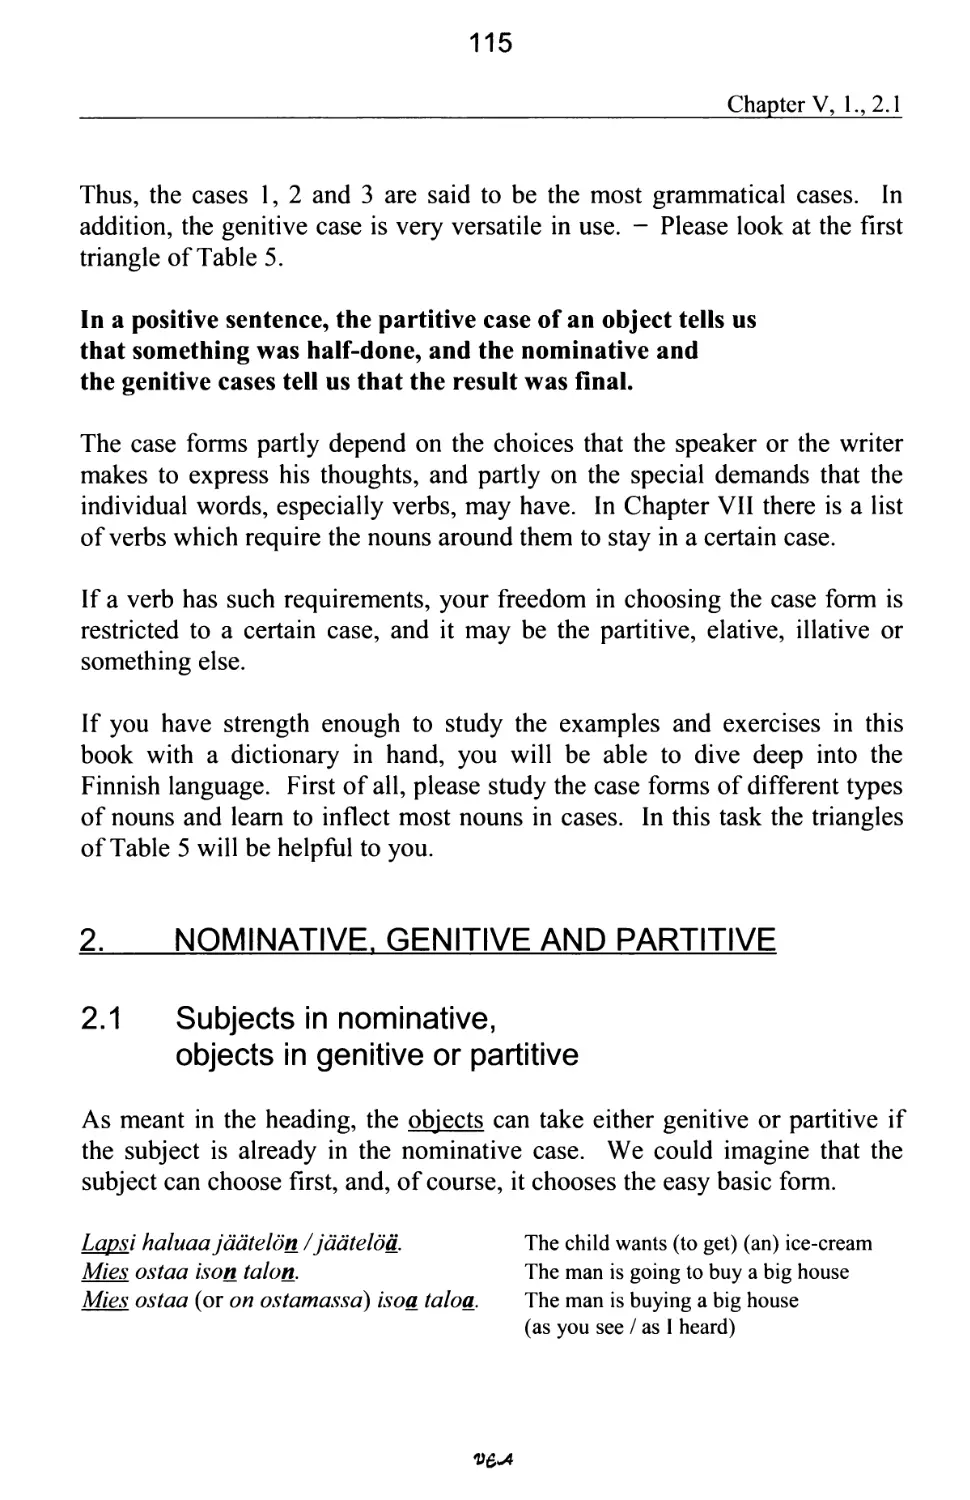 2. NOMINATIVE, GENITIVE AND PARTITIVE